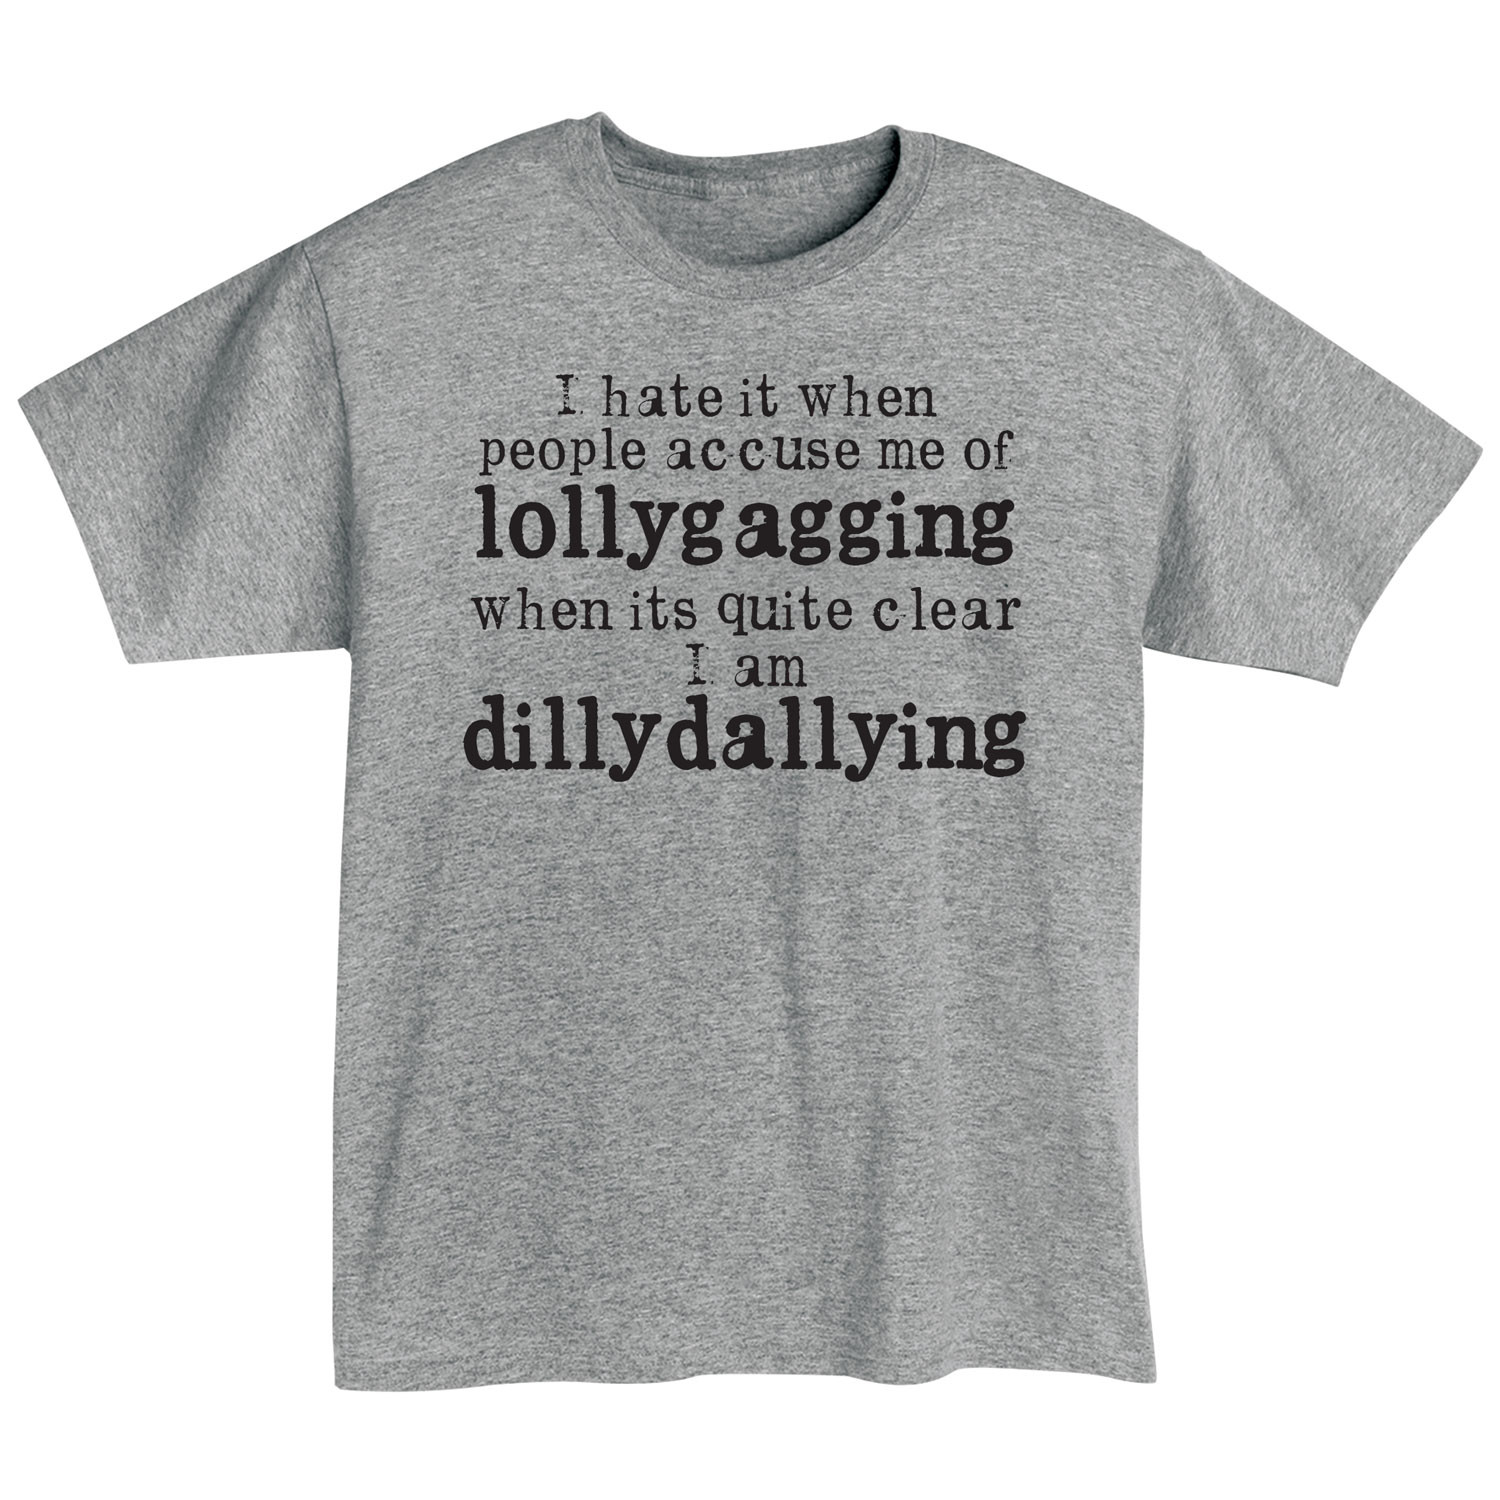 Lollygaggin or just Dilly-dallying – my life